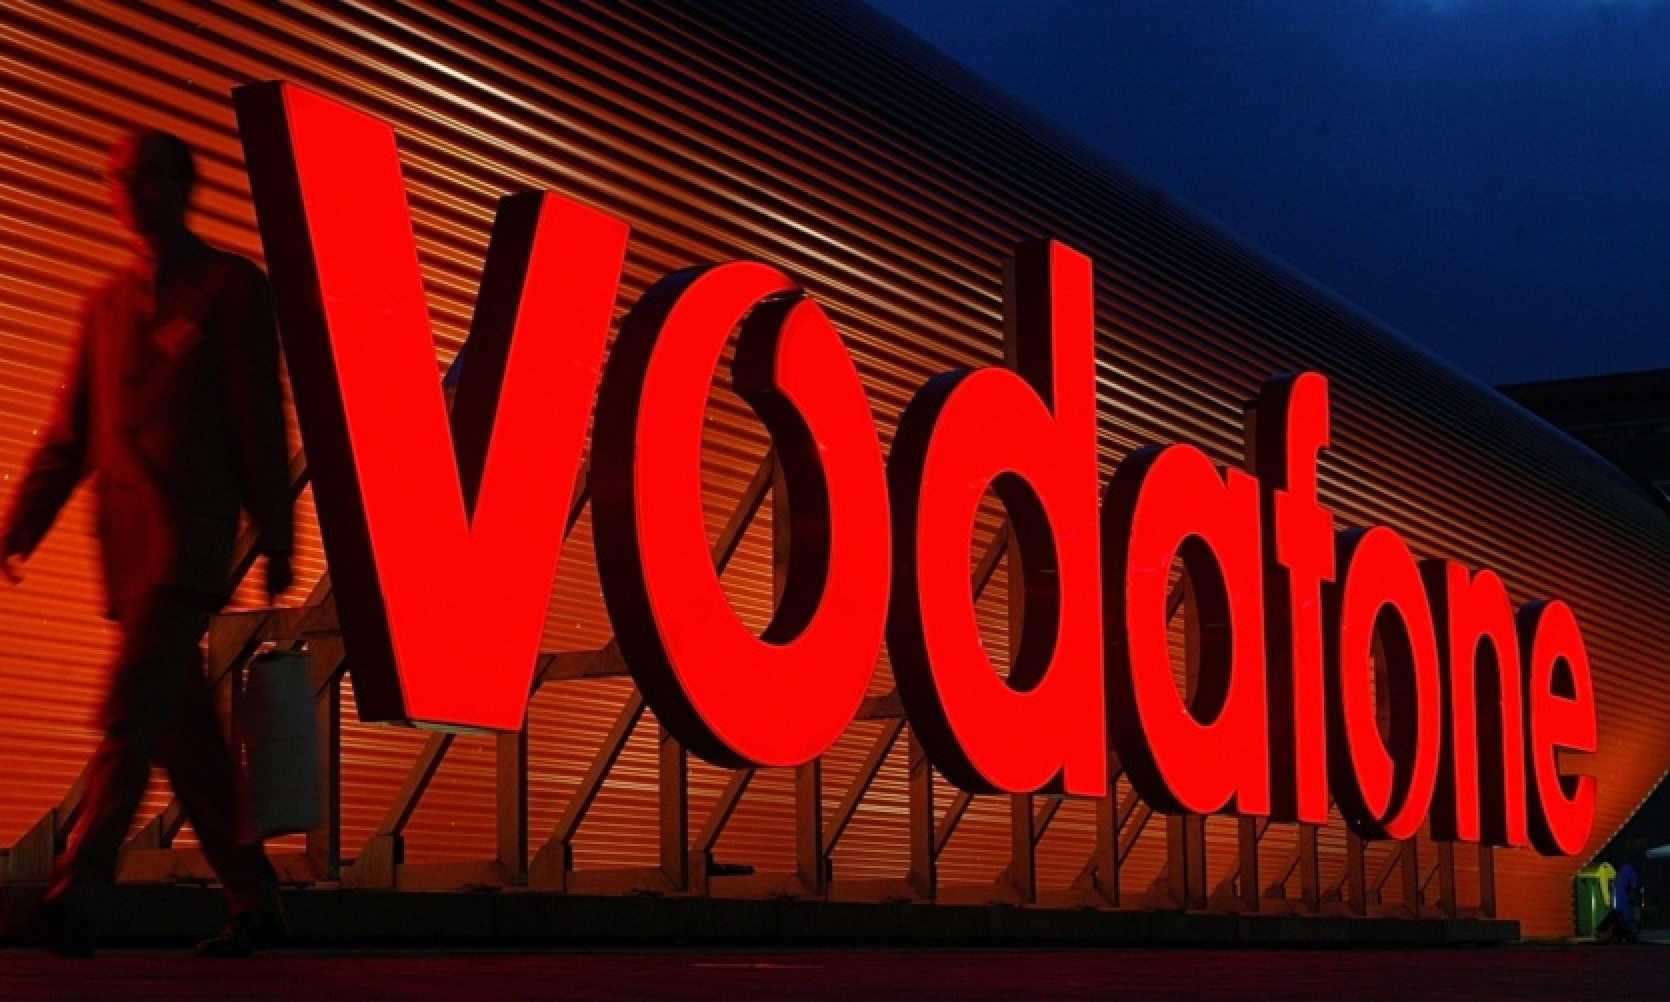 Vodafone Ukraine has developed its own version of AI for contact centers - launch scheduled for May 15